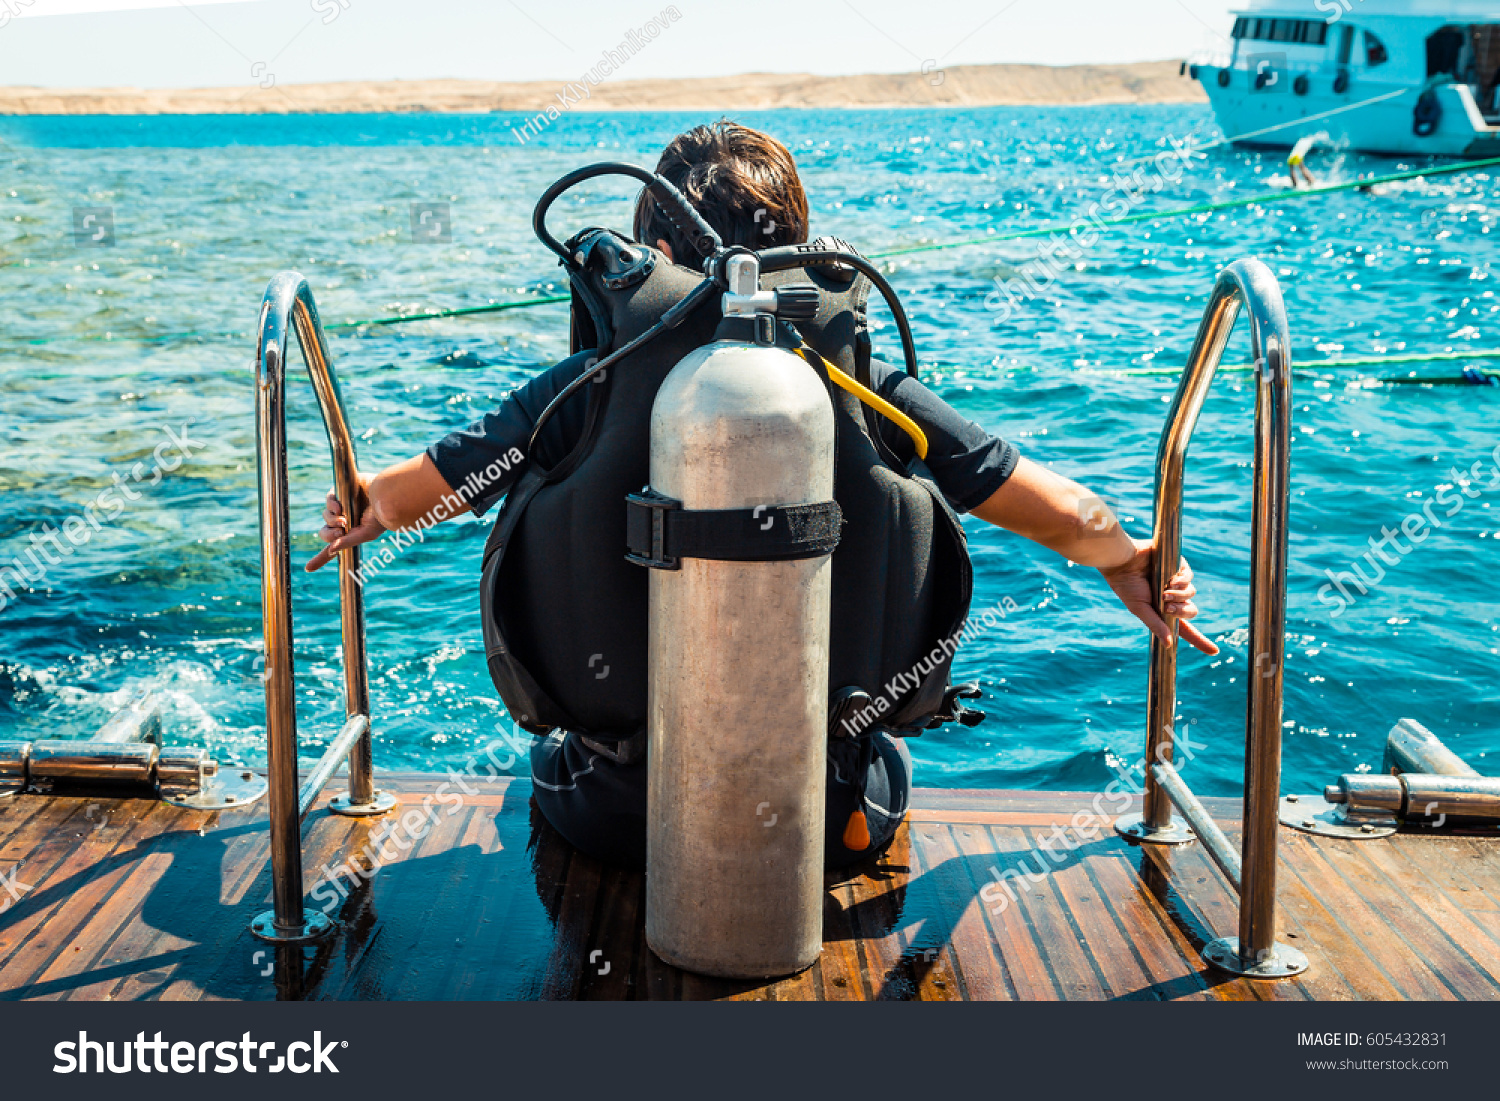 Scuba diver before diving. A diving lesson in open water. #605432831